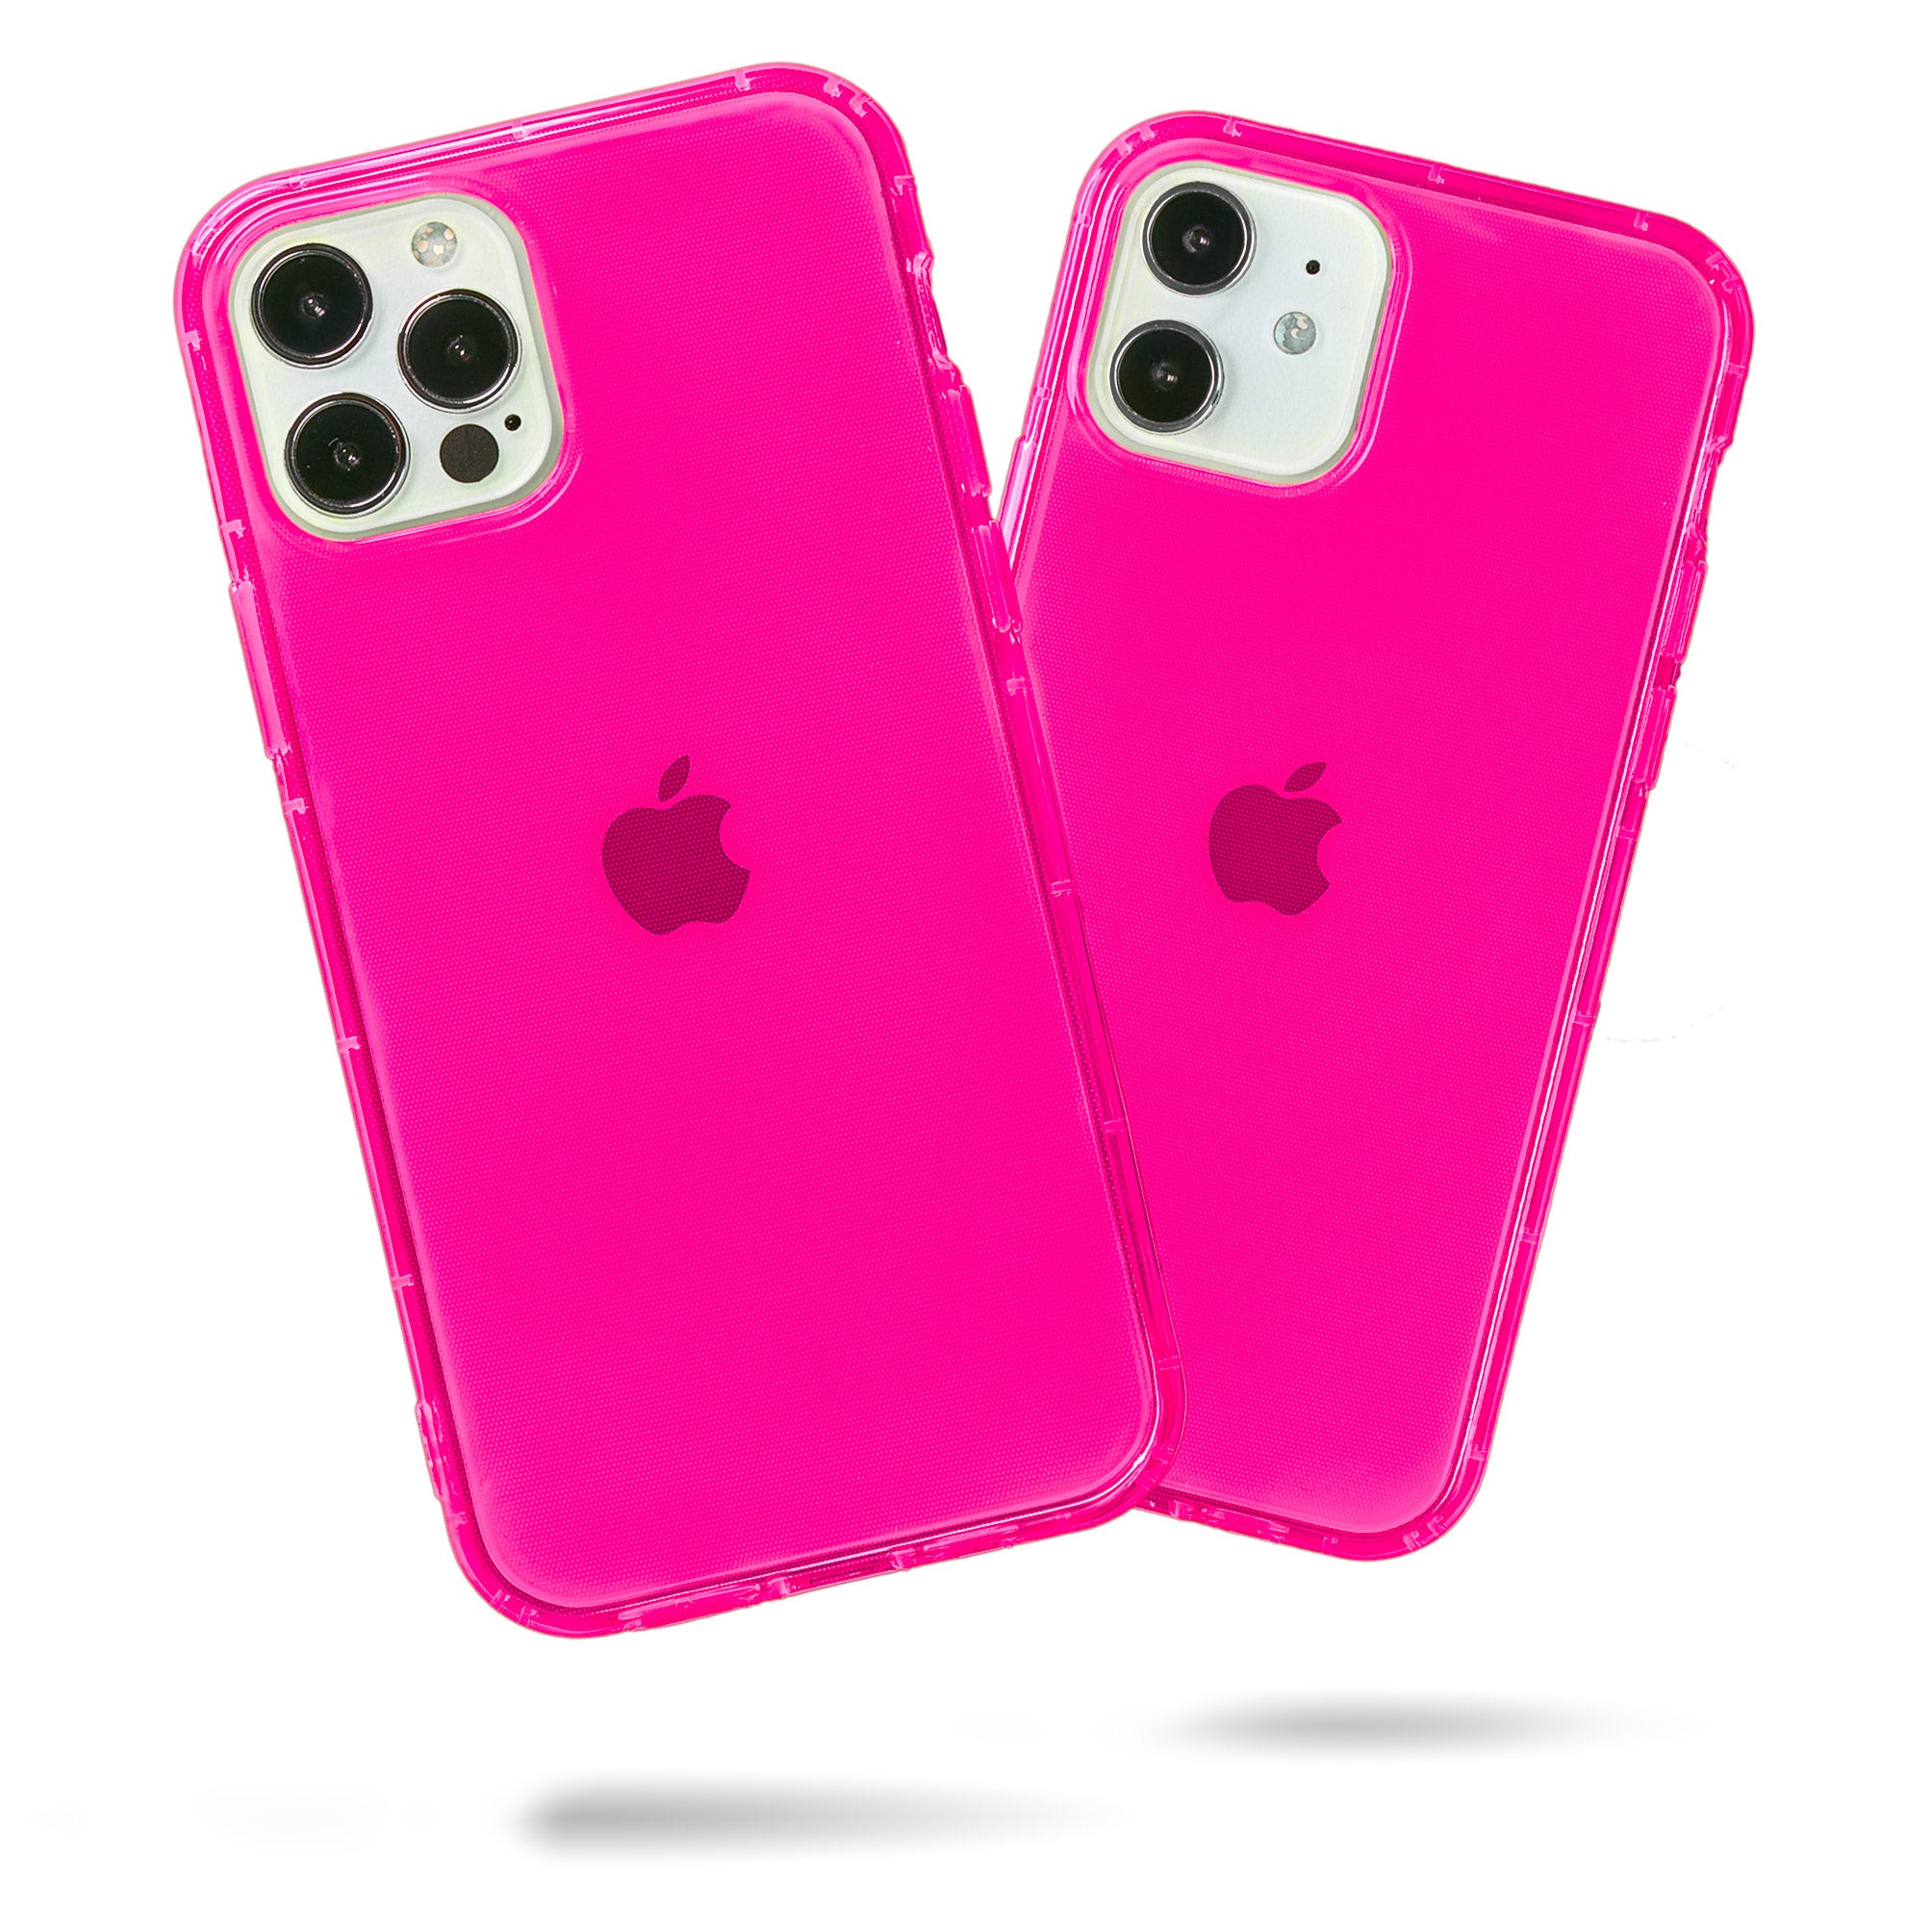 Highlighter Case for iPhone 12 & iPhone 12 Pro - Eye-Catching Hot